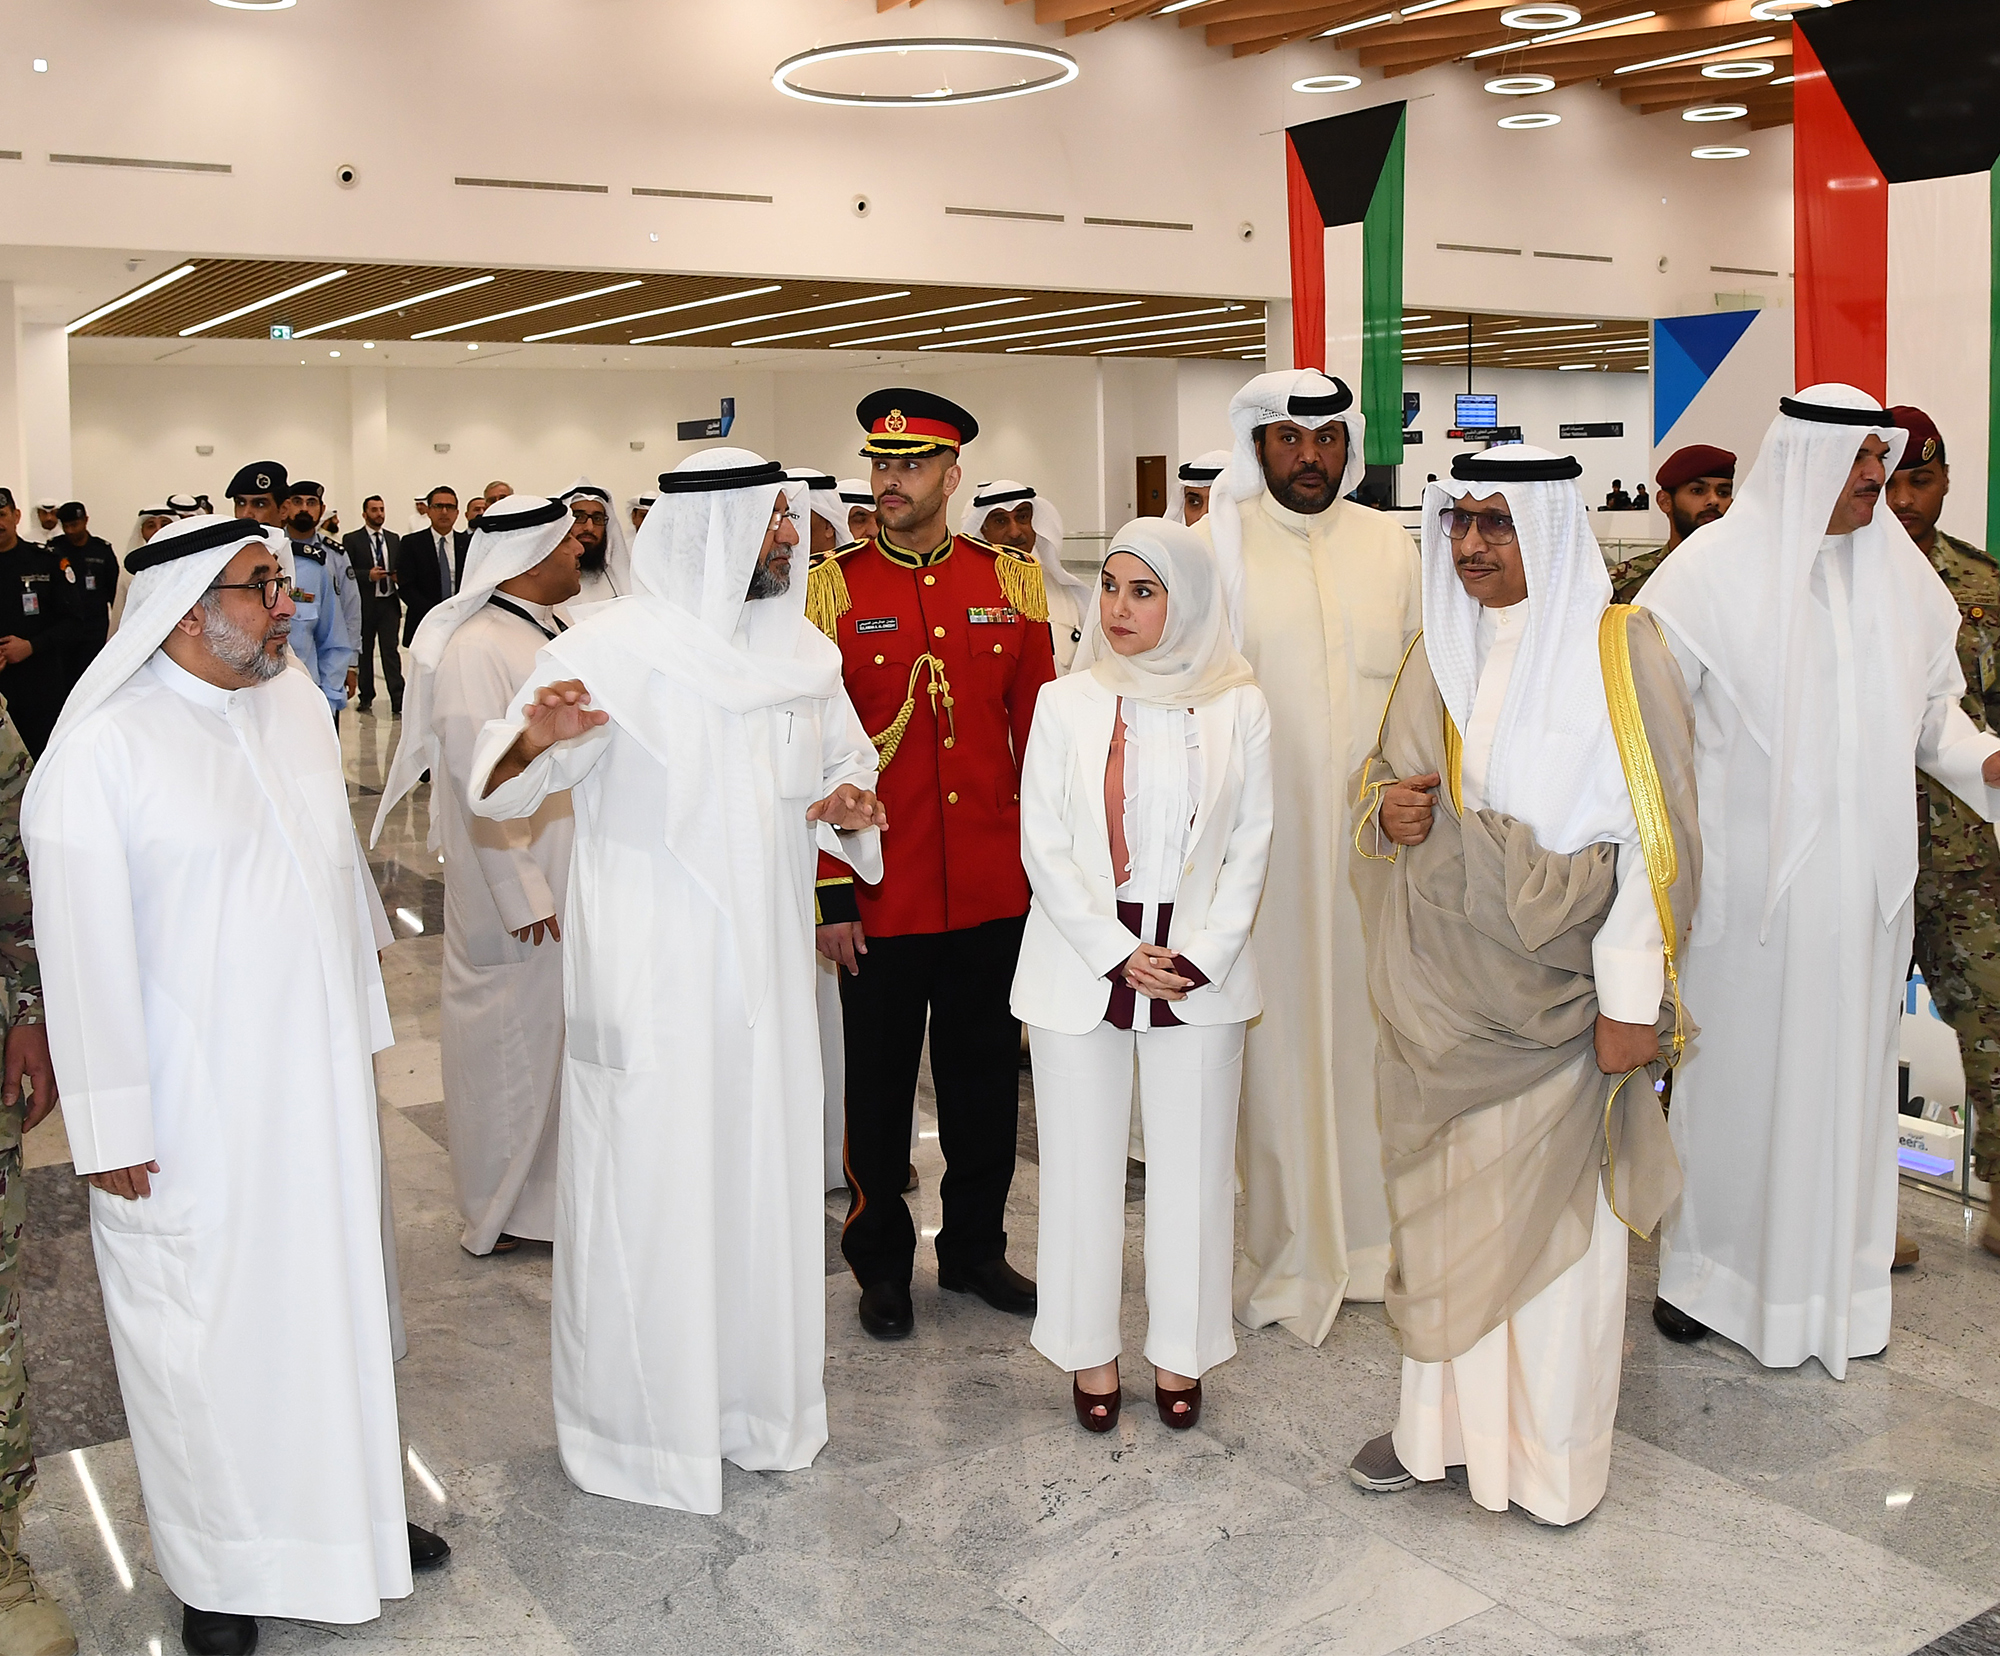 His Highness the Prime Minister Sheikh Jaber Al-Mubarak Al-Hamad Al-Sabah listening to Jazeera Airways Chairman Marwan Boudai during the inauguration of the new passenger terminal